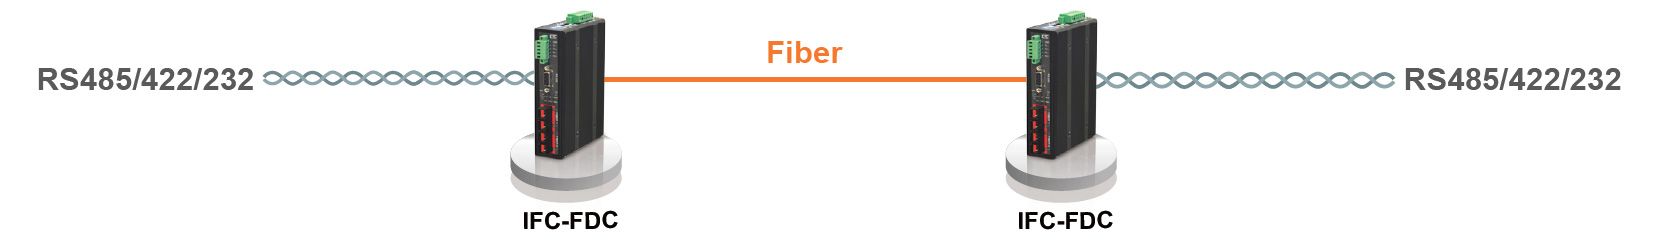 IFC-FDC Fiber Point to Point topology & application